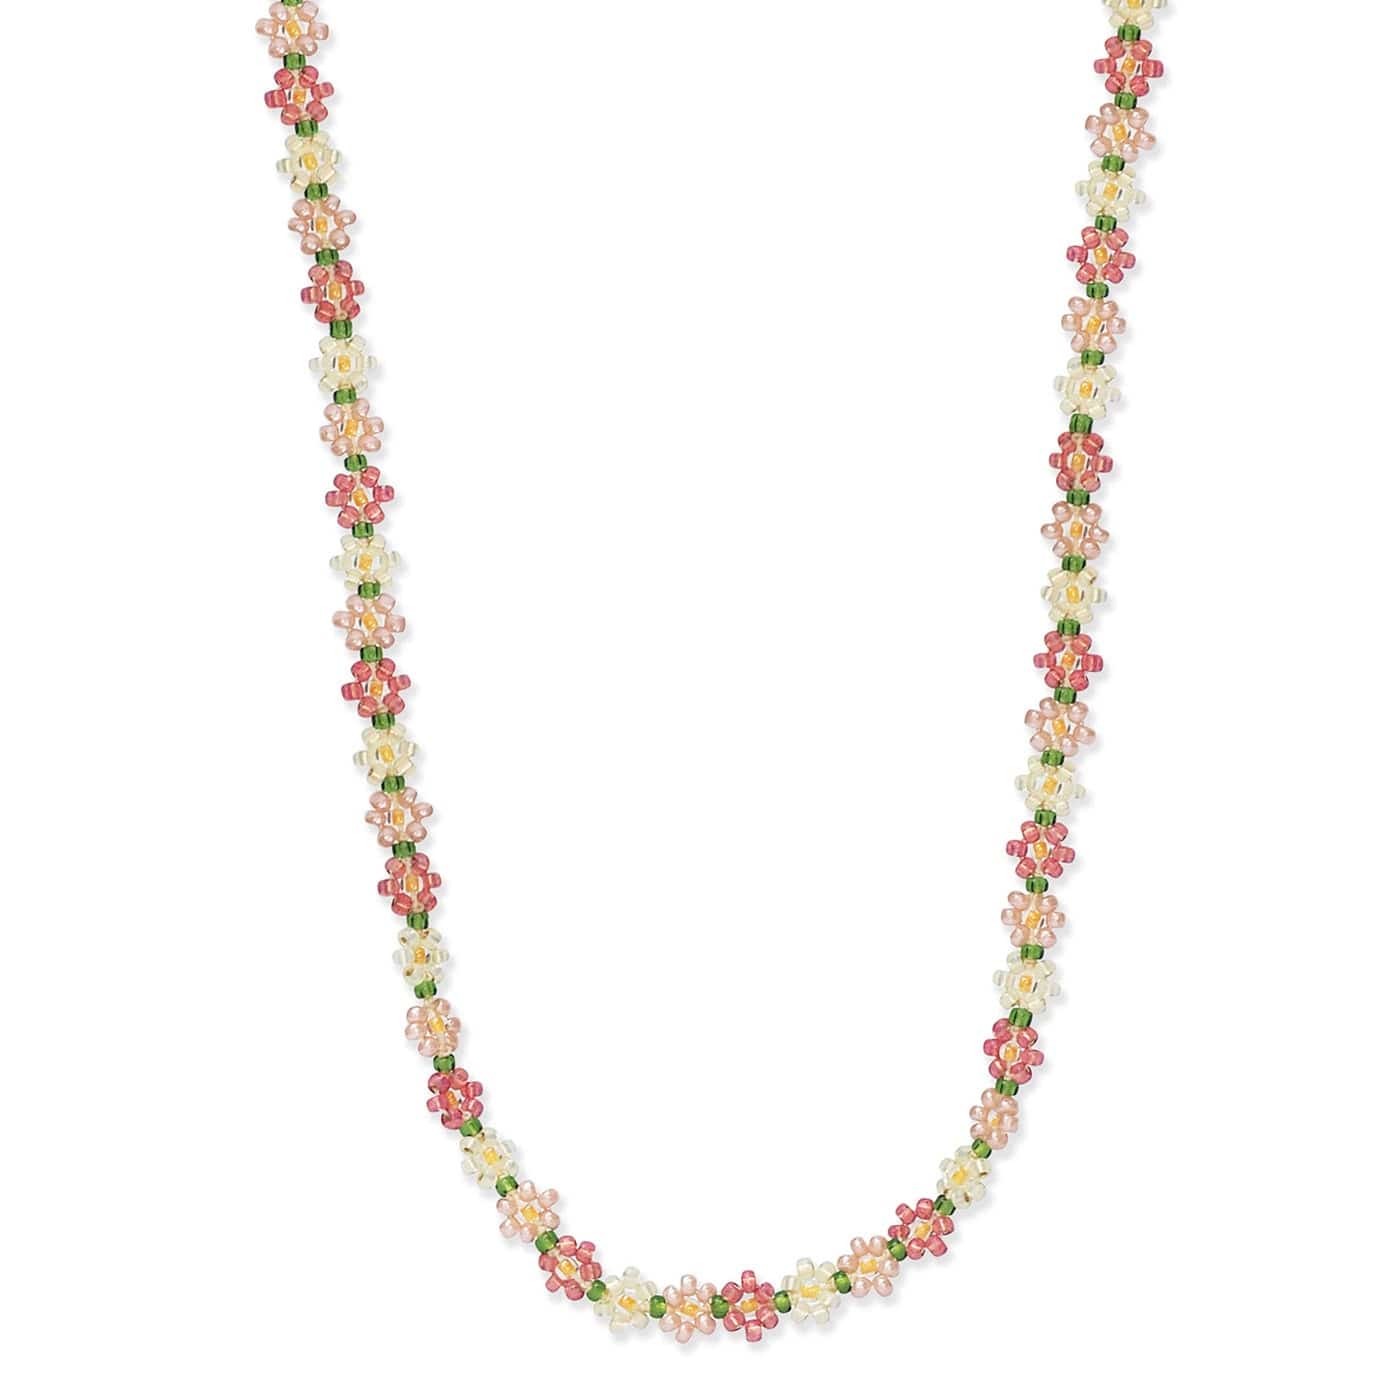 TAI JEWELRY Necklace Rose Handmade Seed Bead Floral Necklace